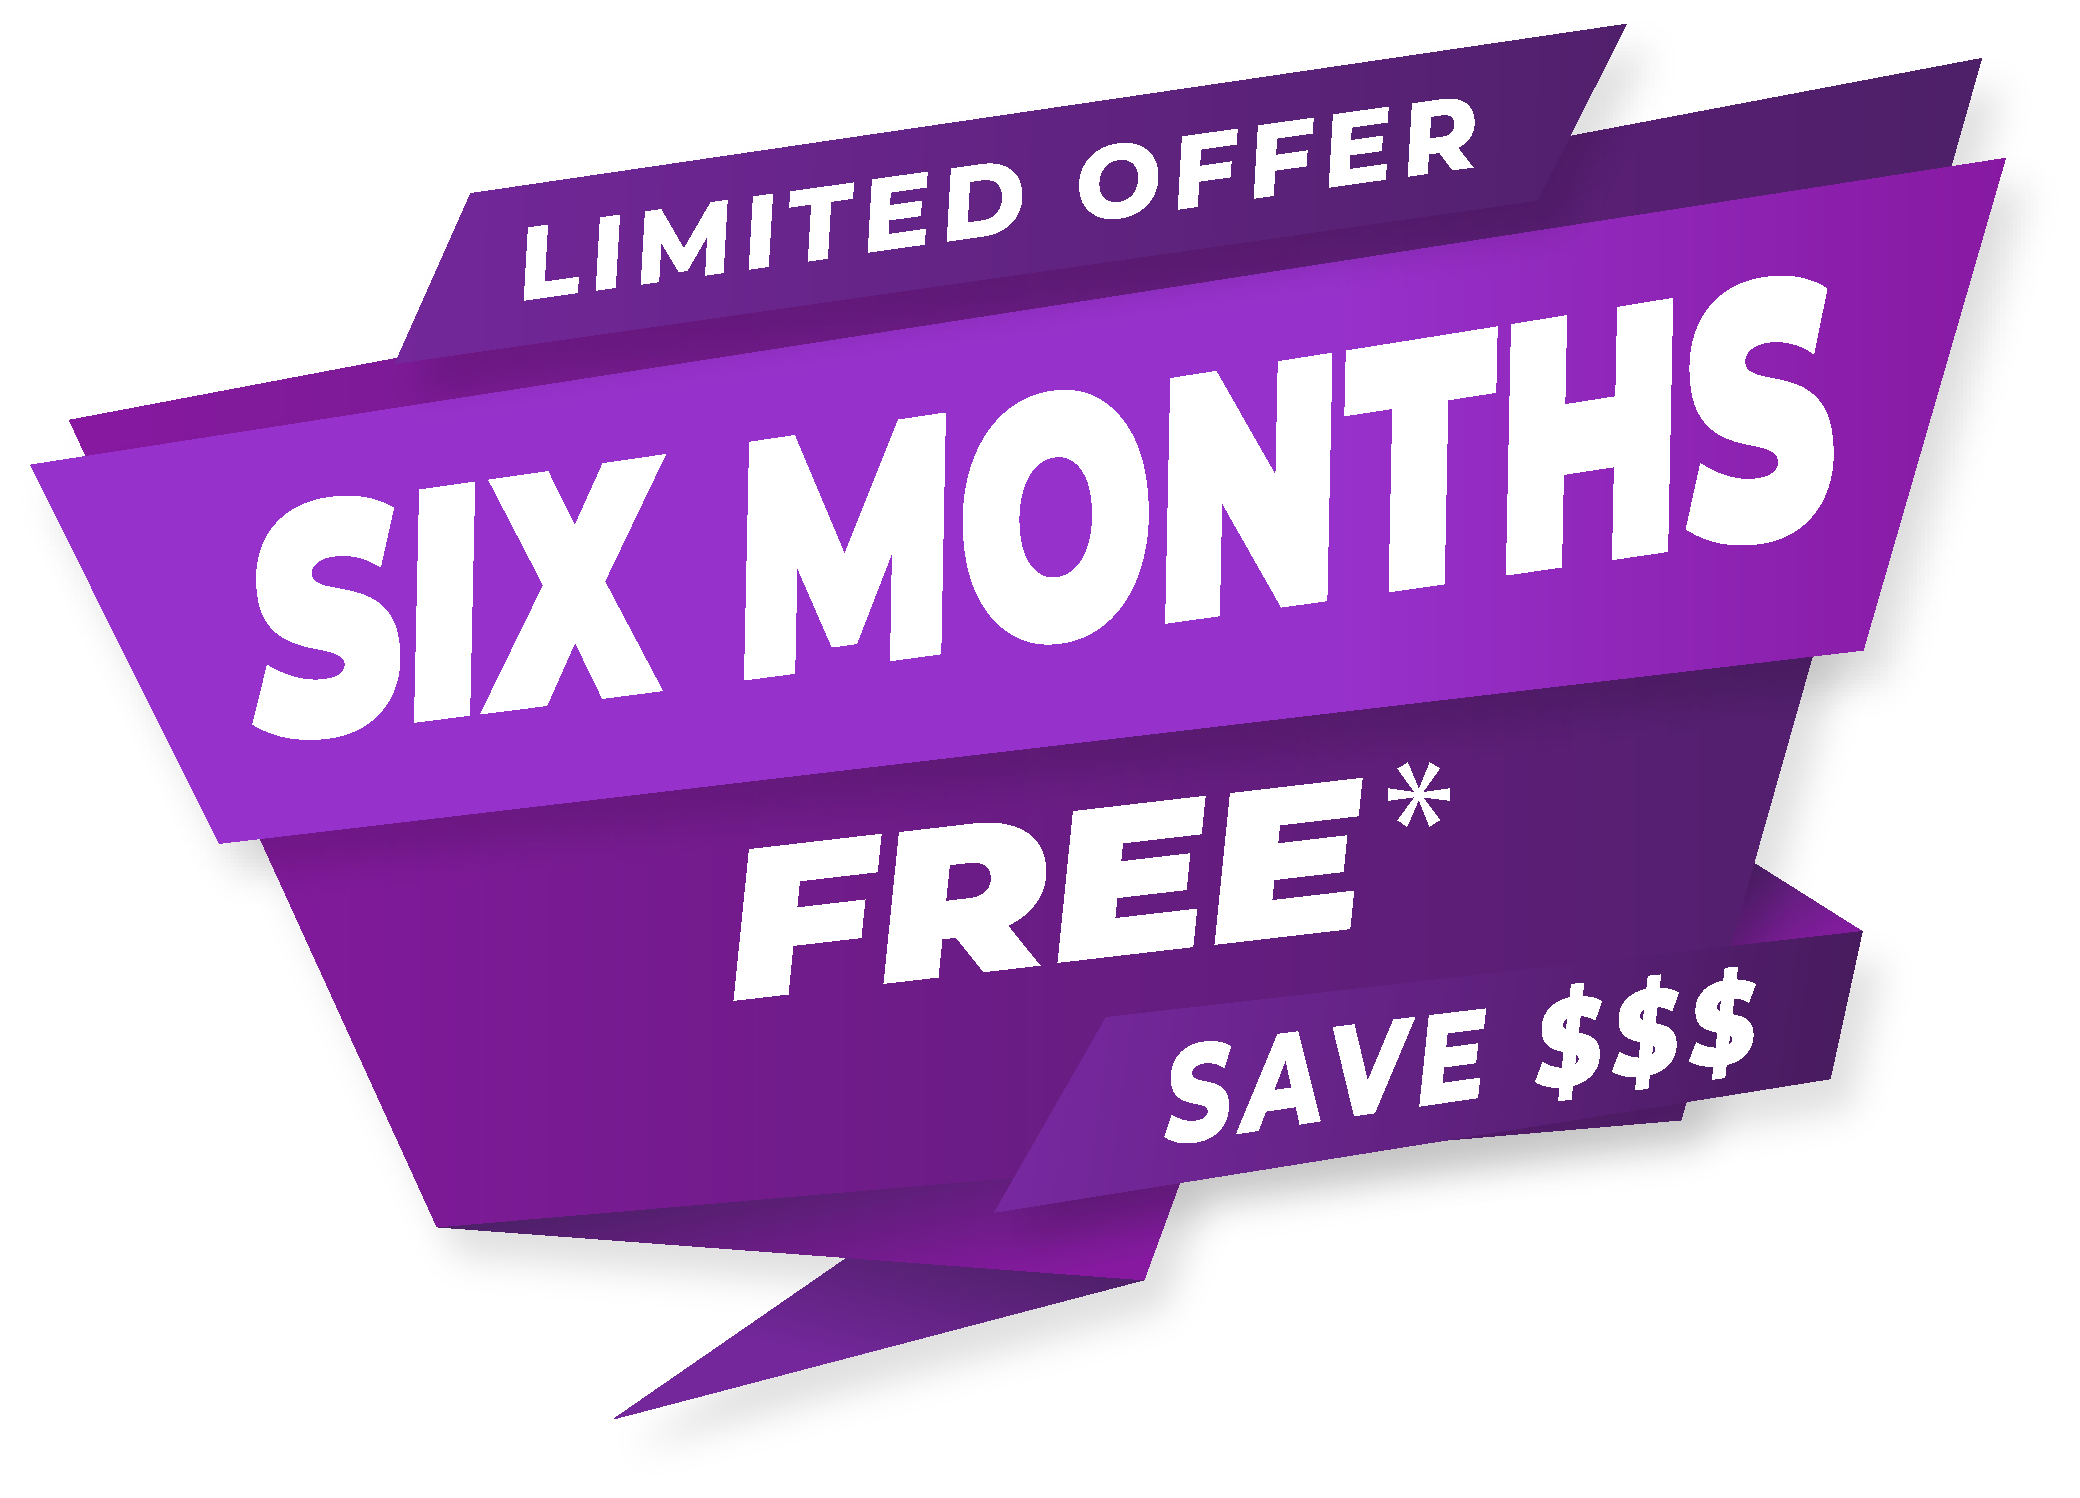 6 Months free cloudrent hire software